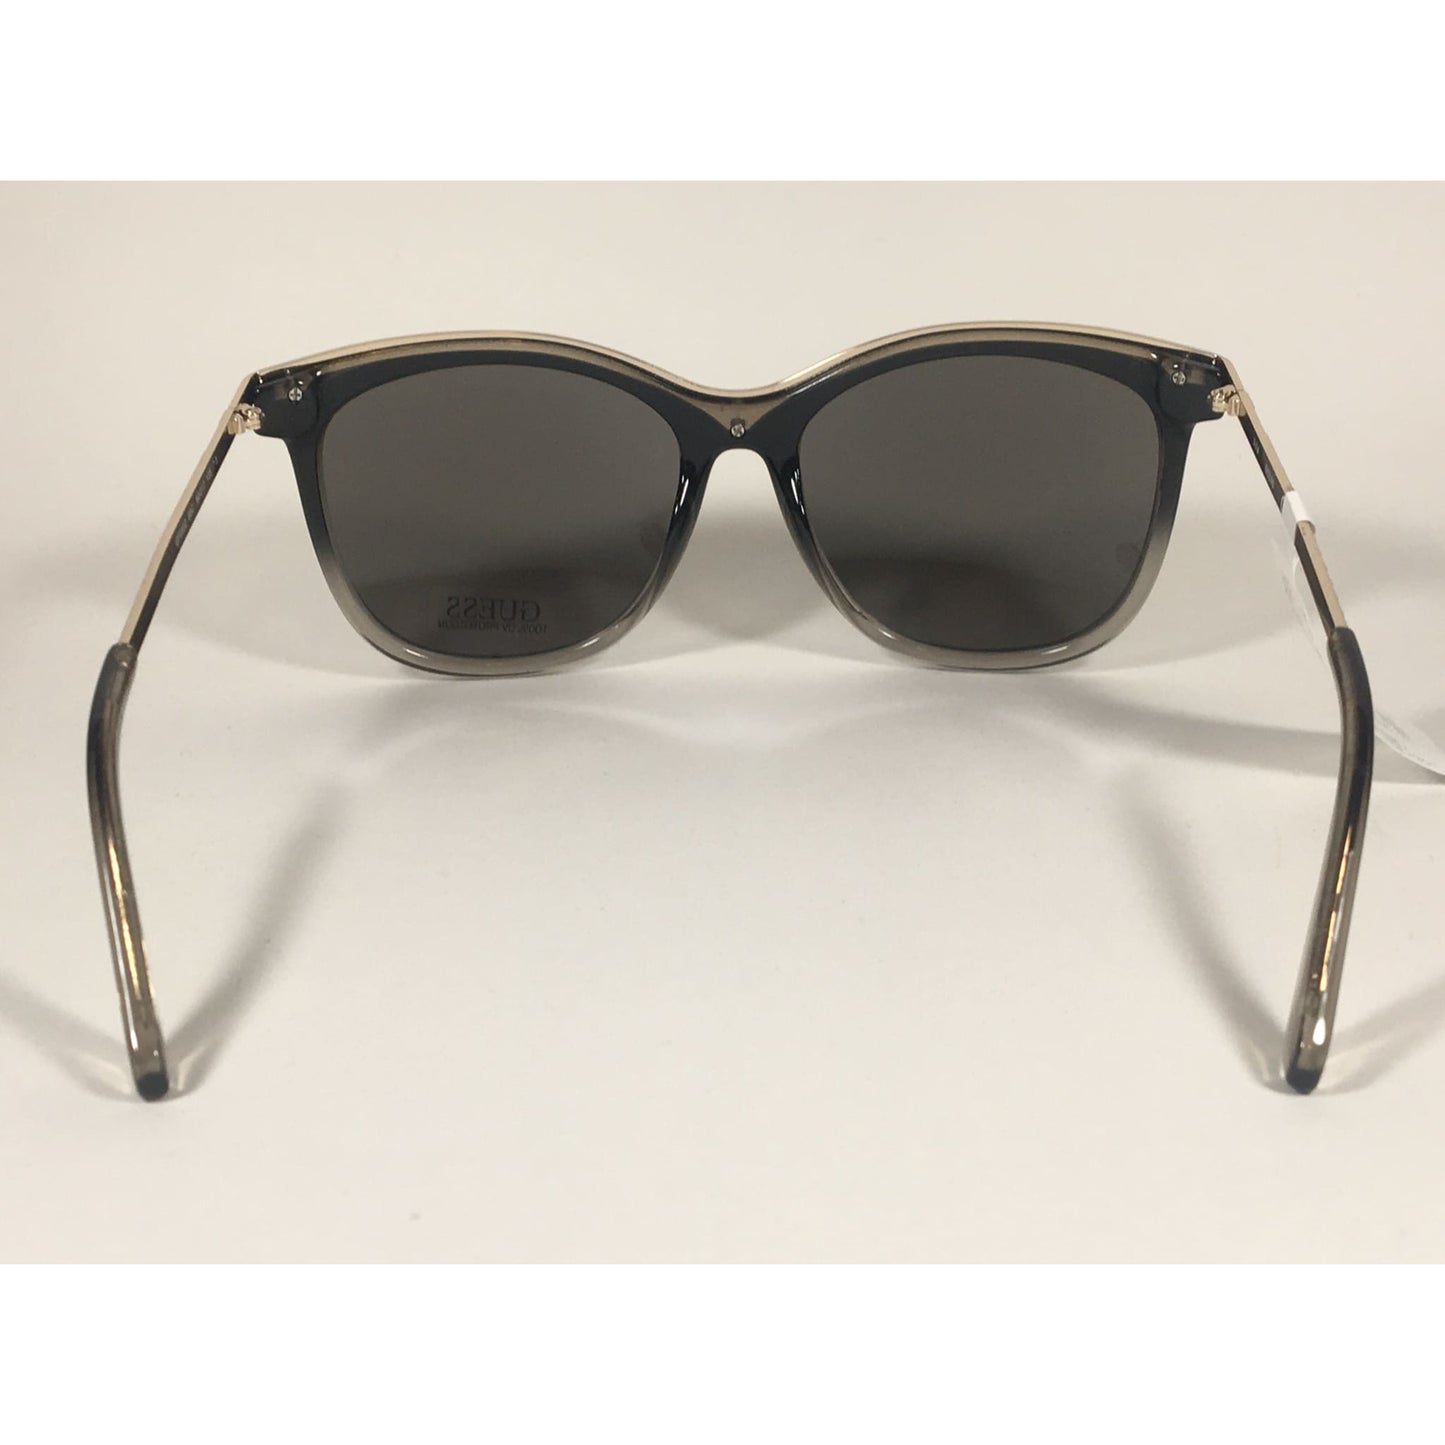 Guess Oversized Designer Sunglasses Black Crystal and Gold Silver Mirror Lens GF0302 05C - Sunglasses